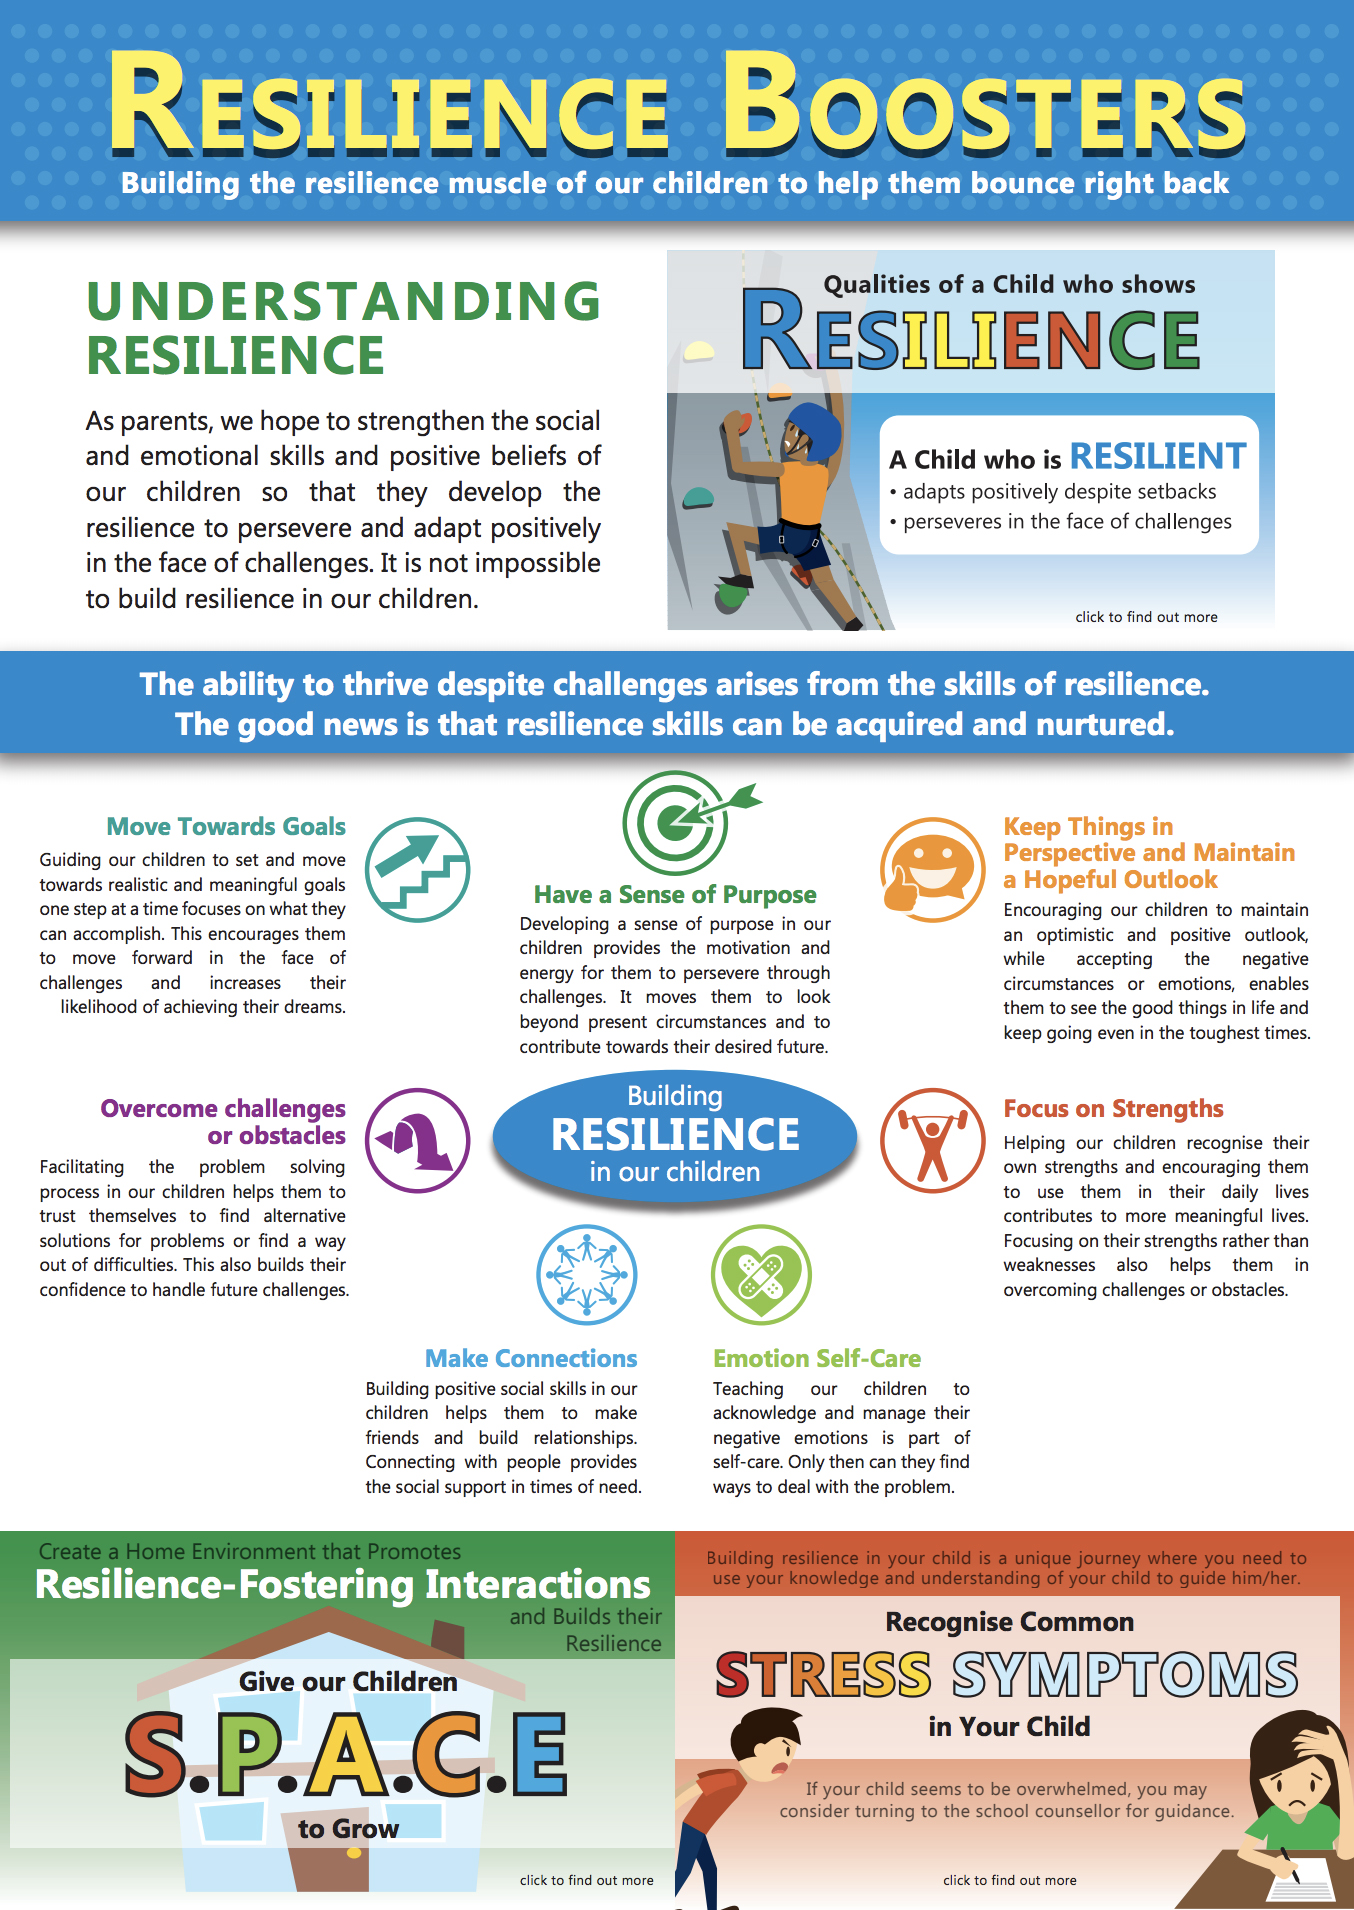 Resilience boosters